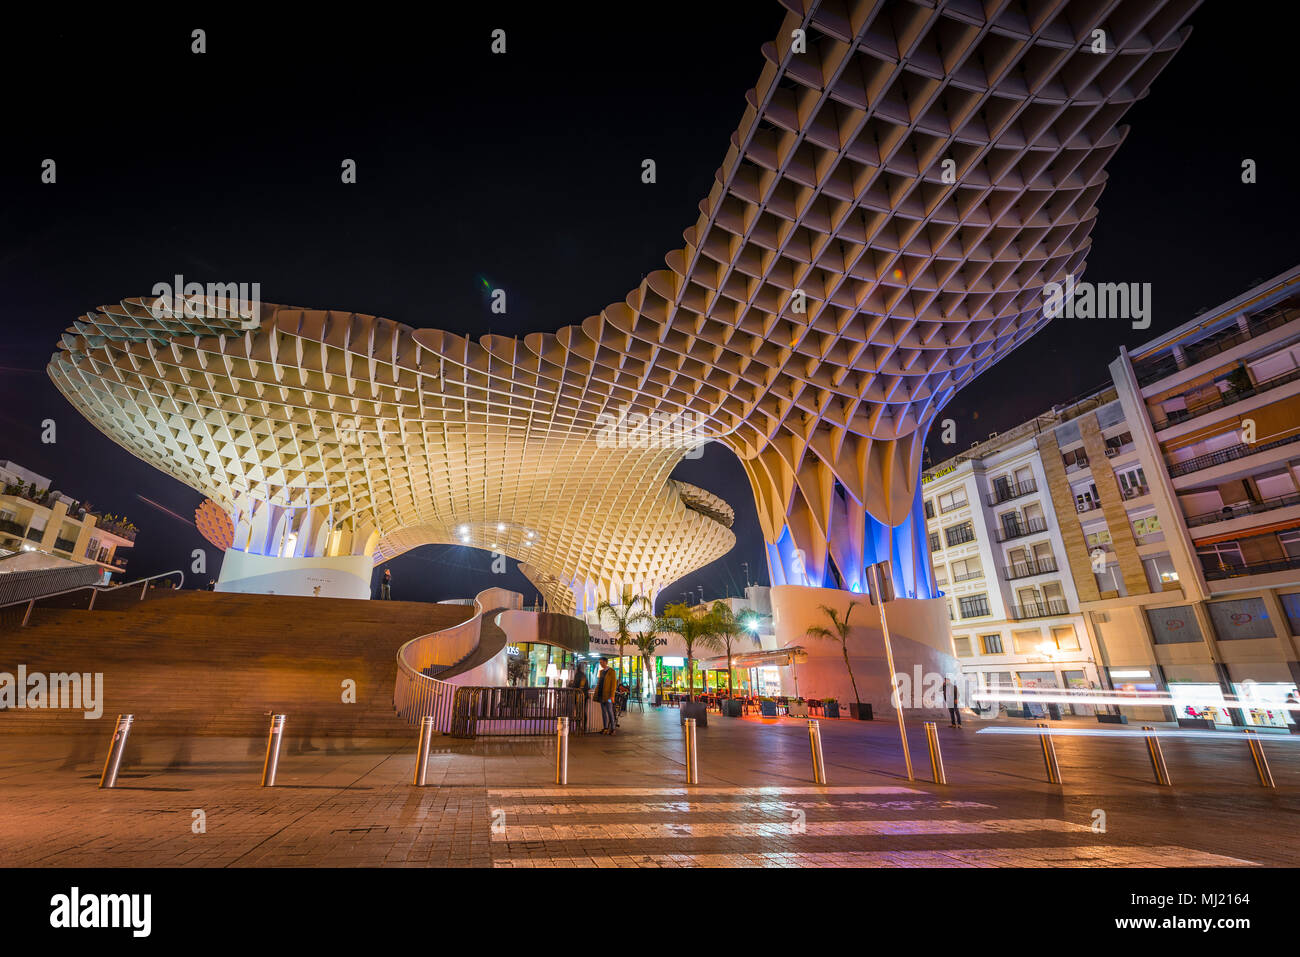 Modern architecture, wooden structure Metropol Parasol, illuminated, with traces of light at night, Plaza de la Encarnacion Stock Photo